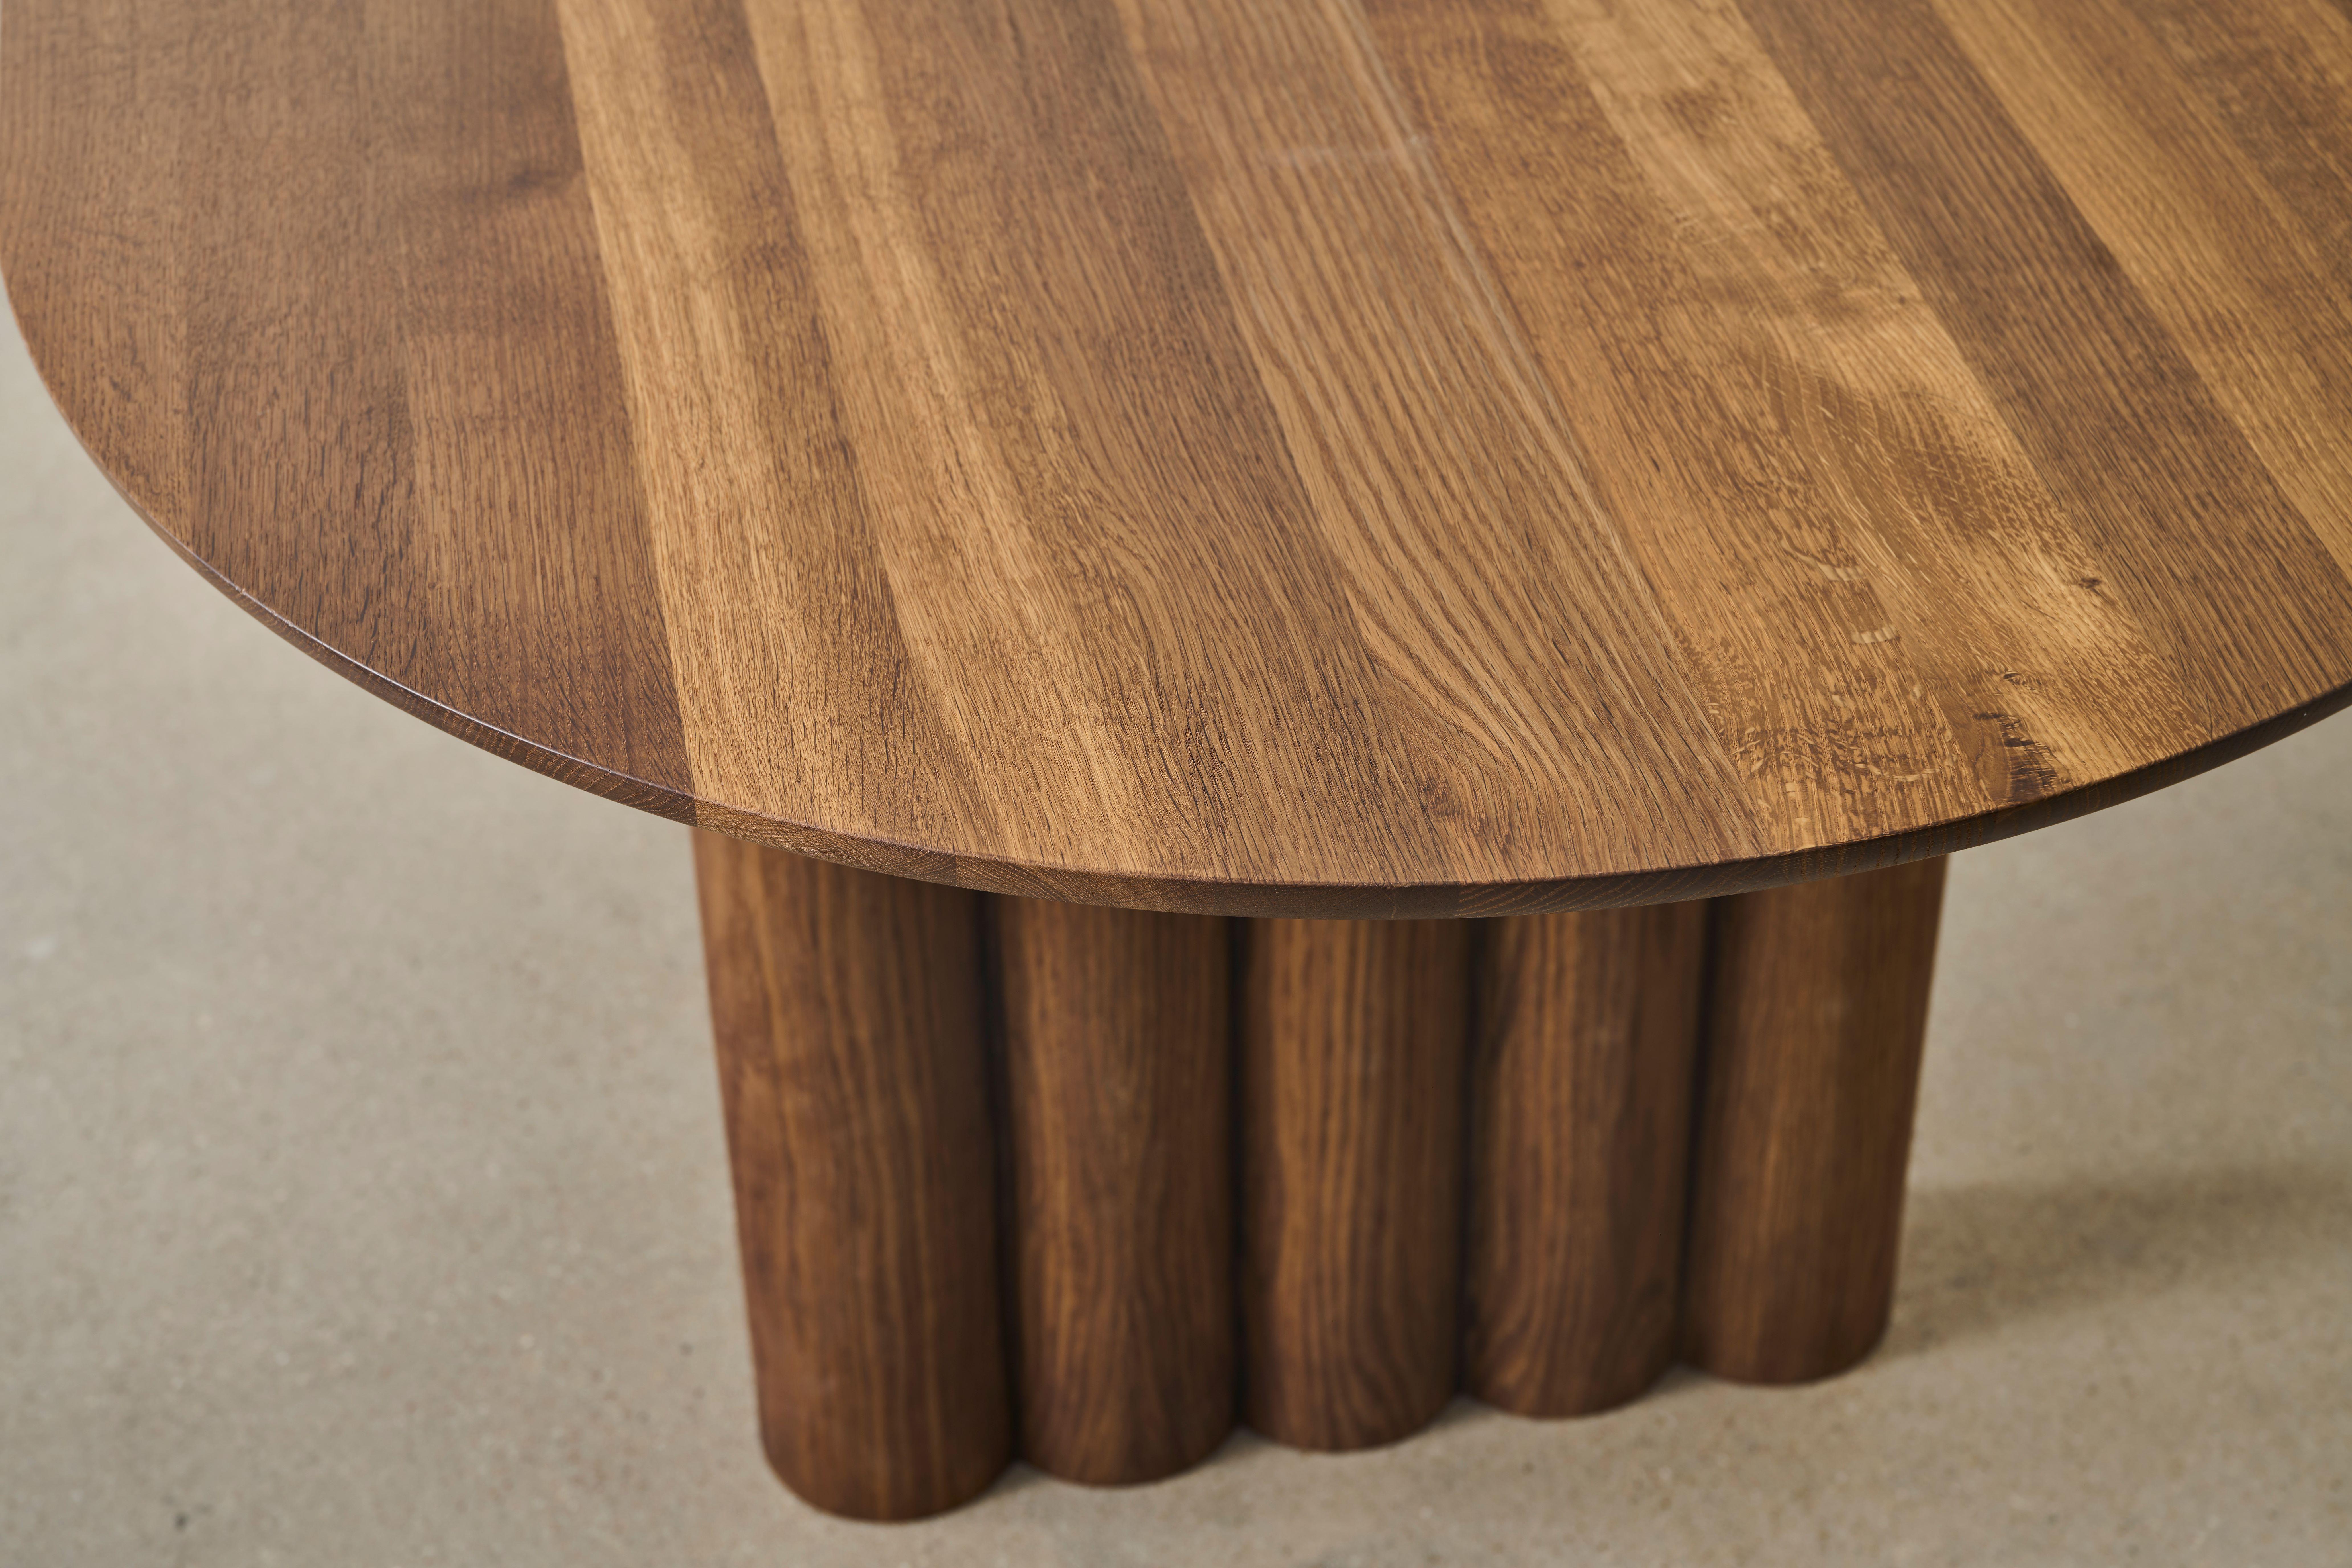 Contemporary Dining Table 'Plush' by Dk3, Smoked Oak or Walnut, 300, Rectangular In New Condition For Sale In Paris, FR